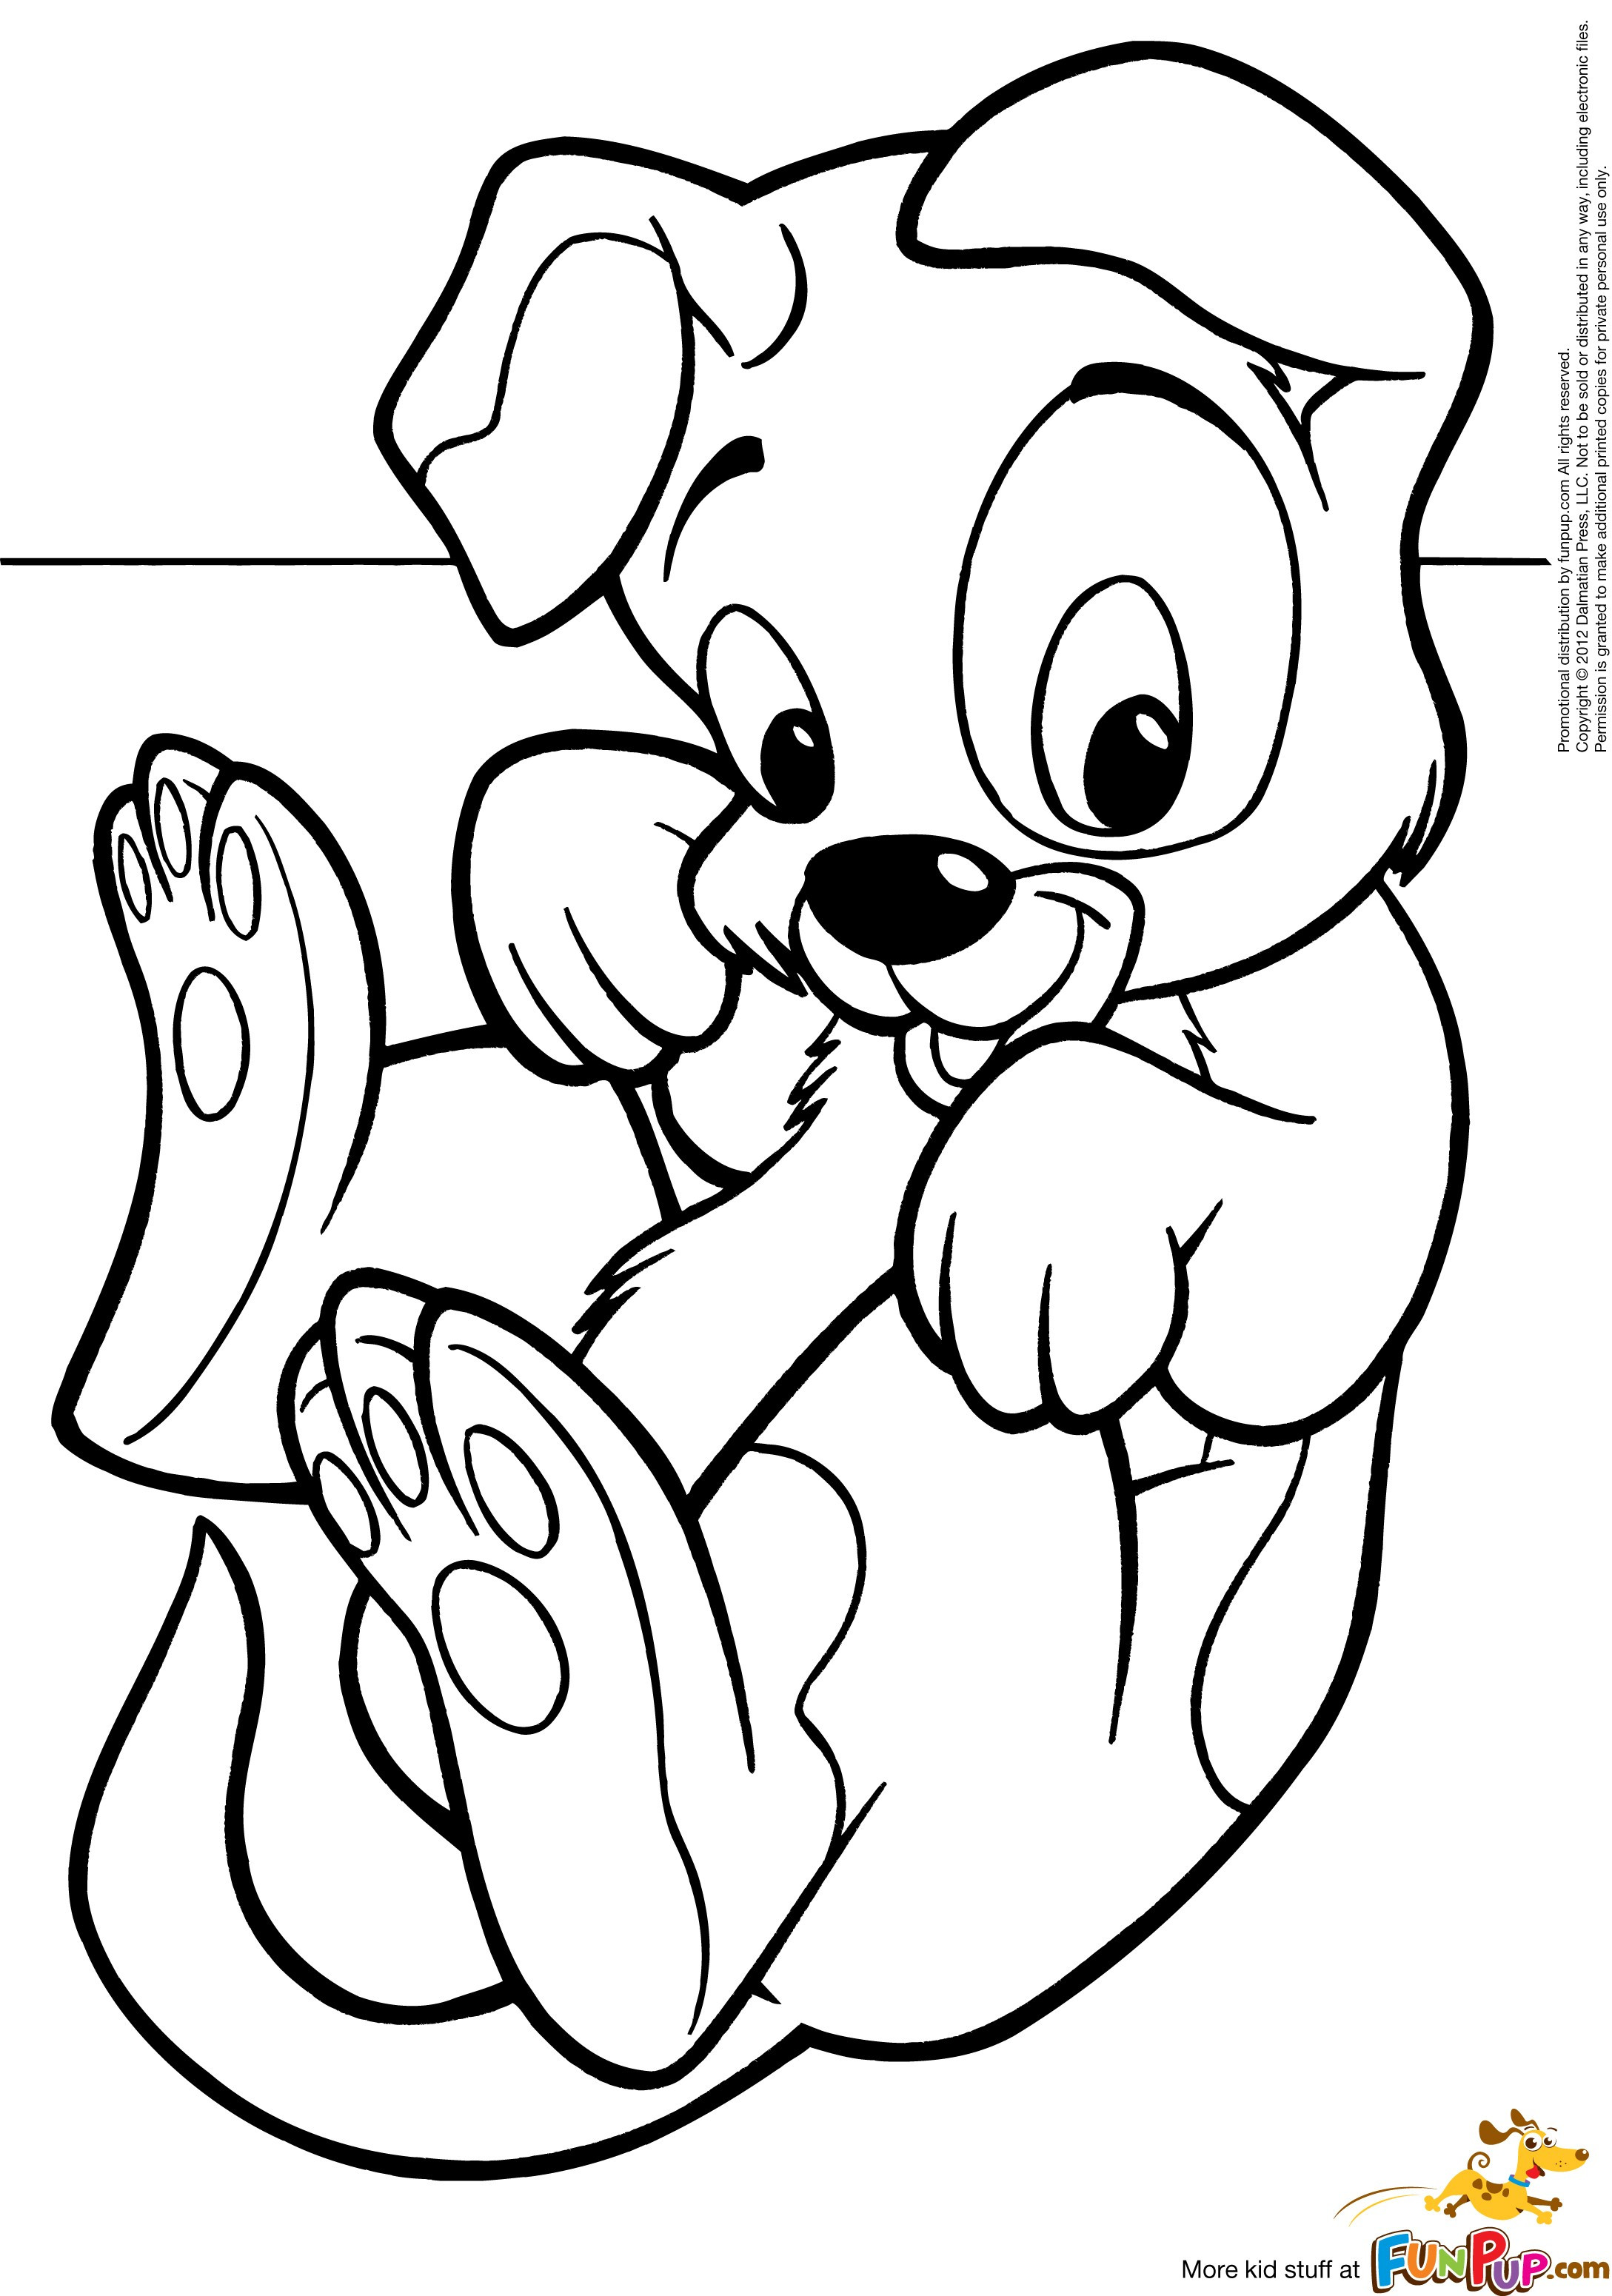 Puppy Coloring Book
 puppy coloring pages Free